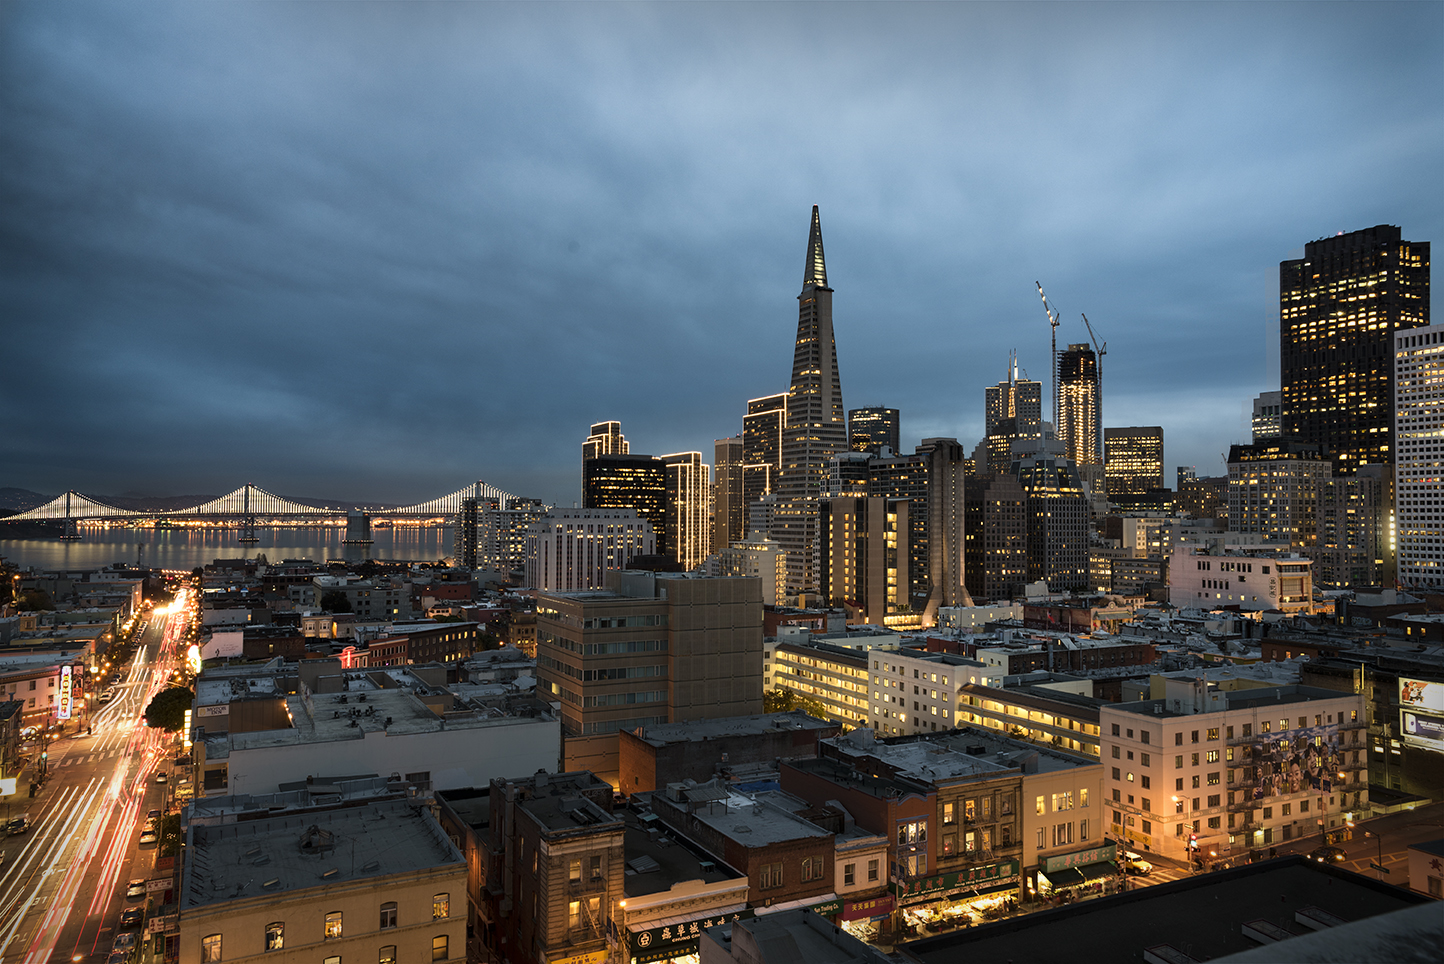 SF city skyline of the Transamerica Pyramid, Bay Bridge and downtown, at evening blue hour